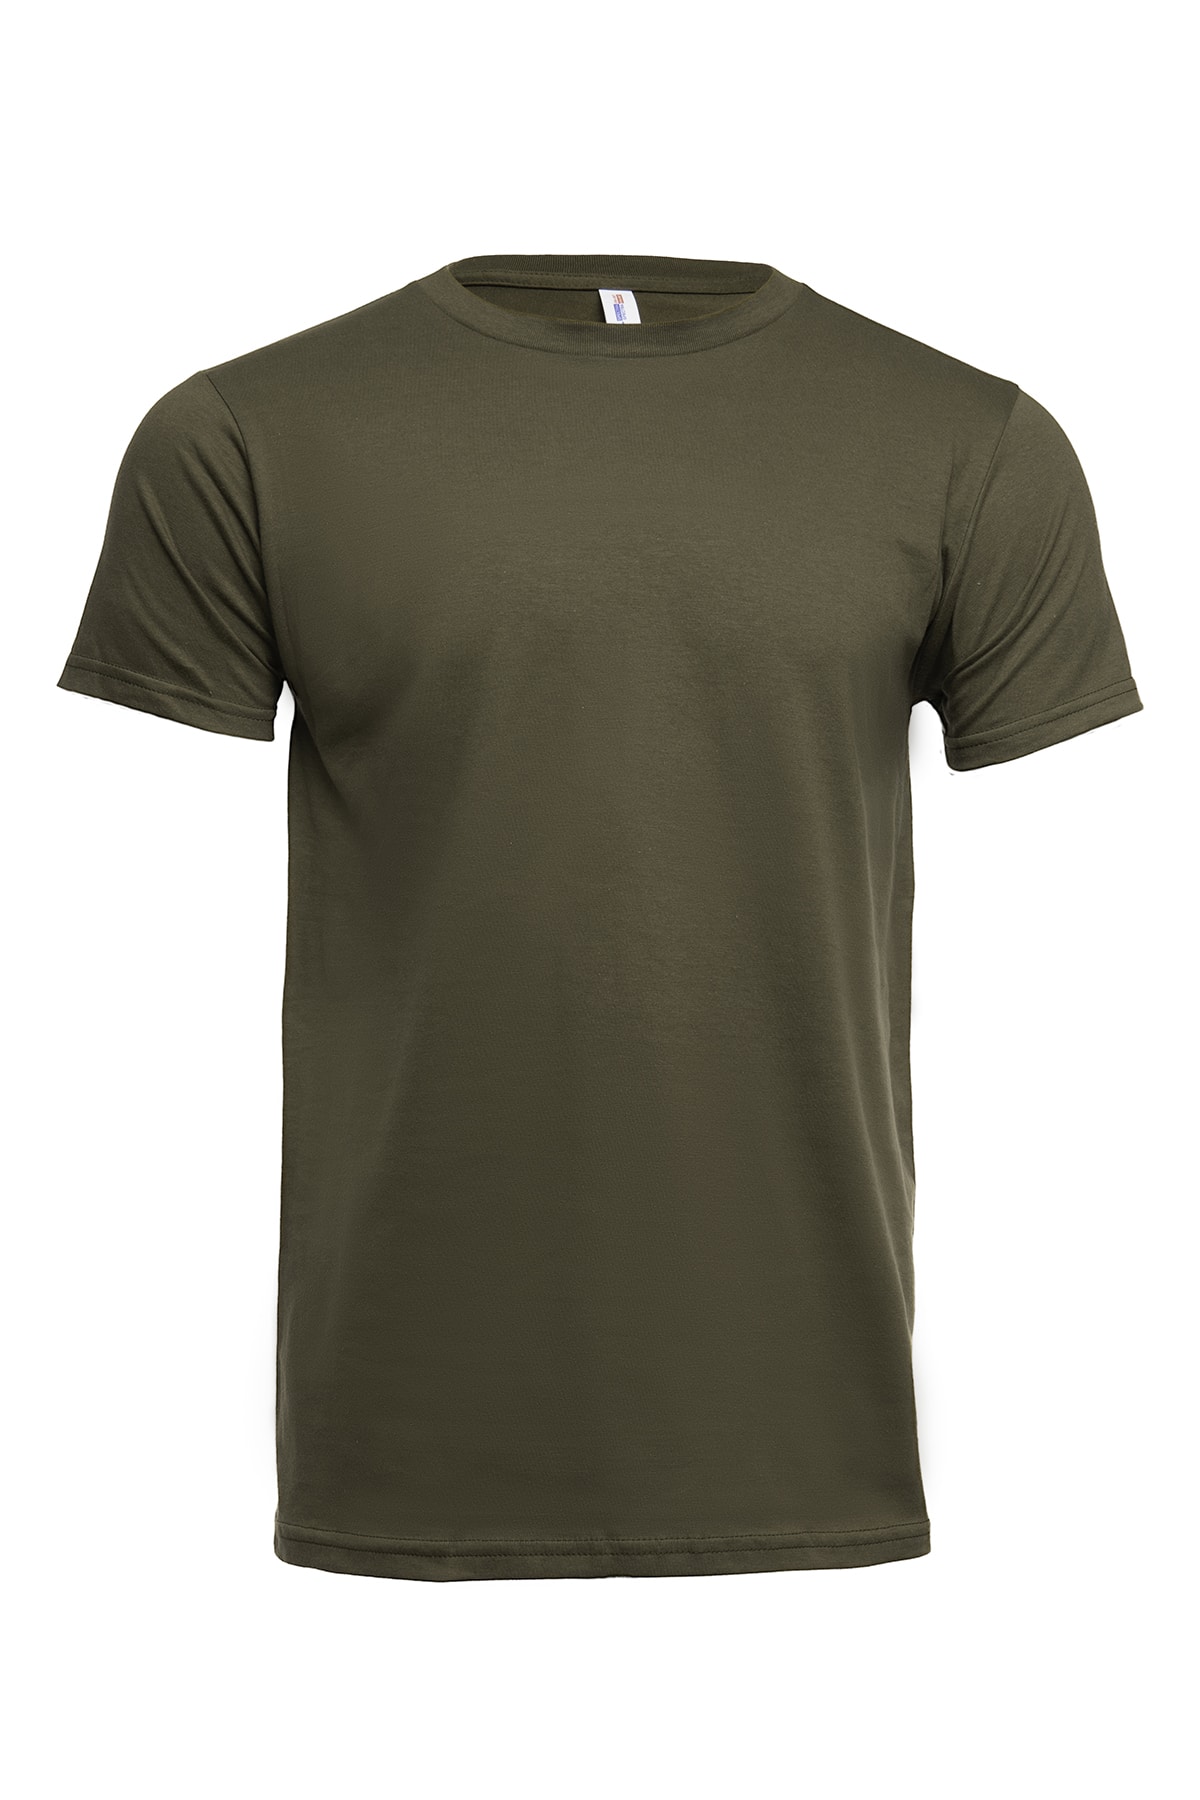 3100 Military Green Front T-shirt